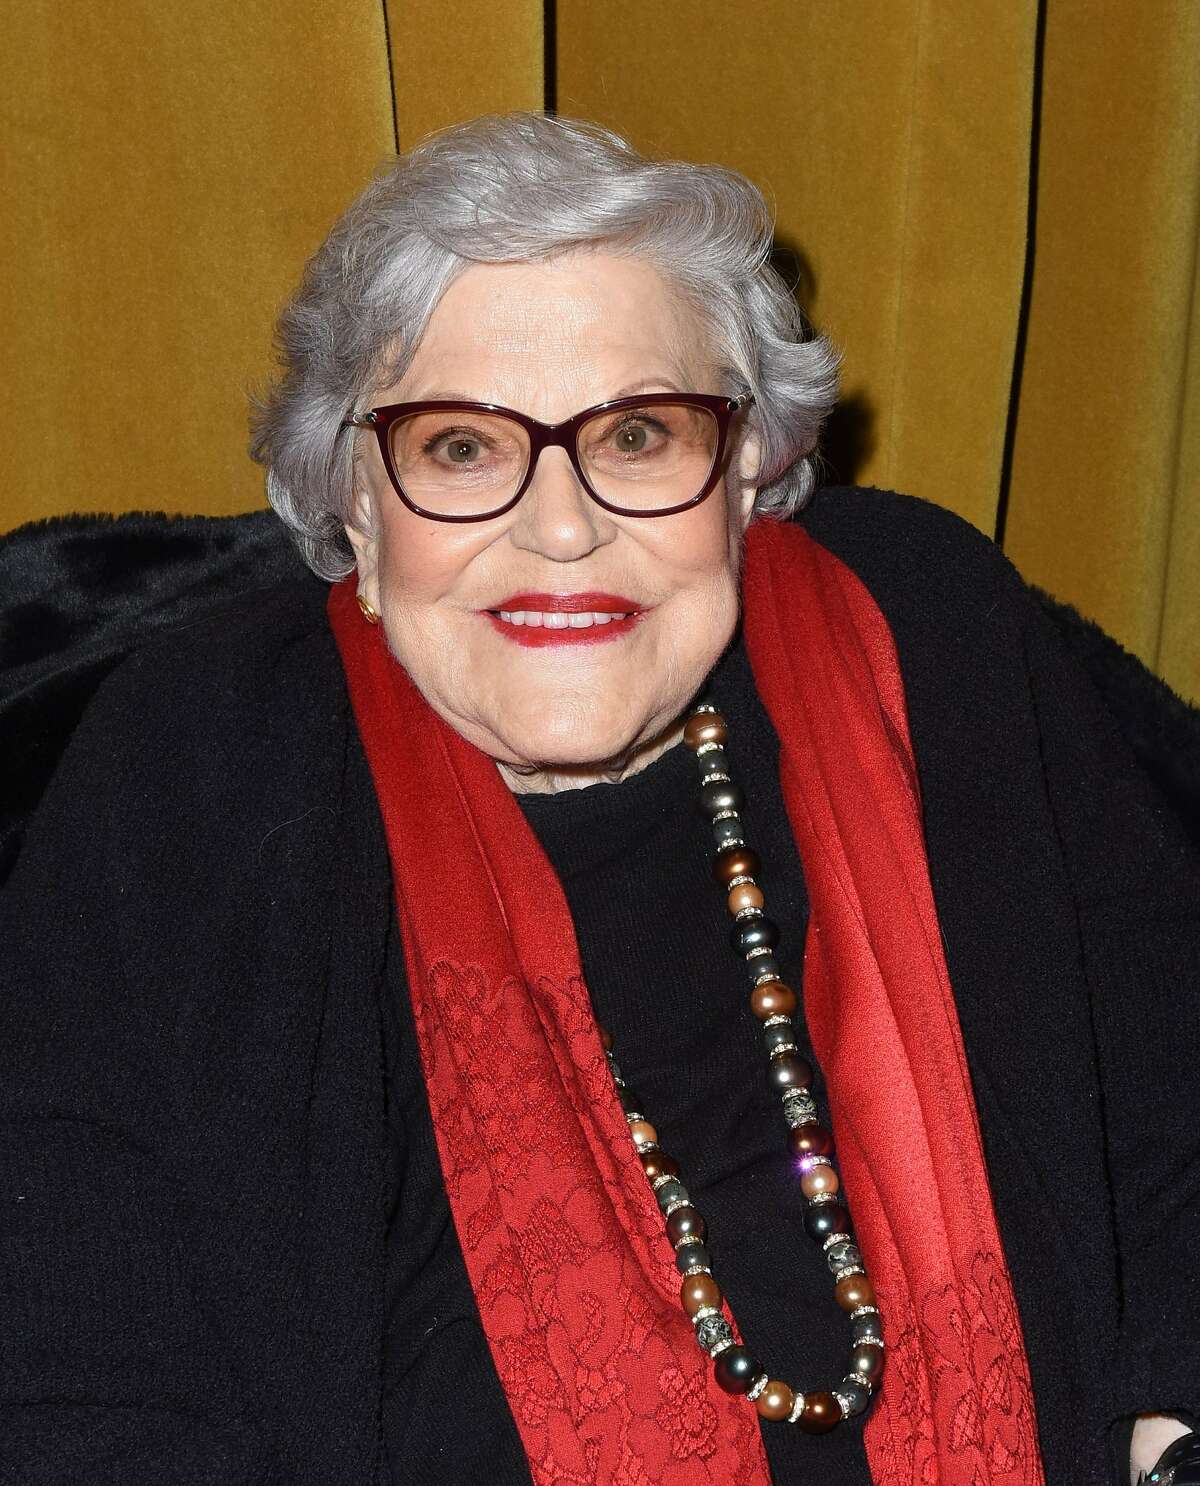 FILE - JANUARY 22: Actor/singer Kaye Ballard passed away on January 21, 2019 at her home in Rancho Mirage, California. She was 93 years old. PALM SPRINGS, CA - JANUARY 06: Kaye Ballard attends a screening of "Kaye Ballard - the Show Goes On" at the 30th Annual Palm Springs International Film Festival on January 6, 2019 in Palm Springs, California. (Photo by Vivien Killilea/Getty Images for Palm Springs International Film Festival )